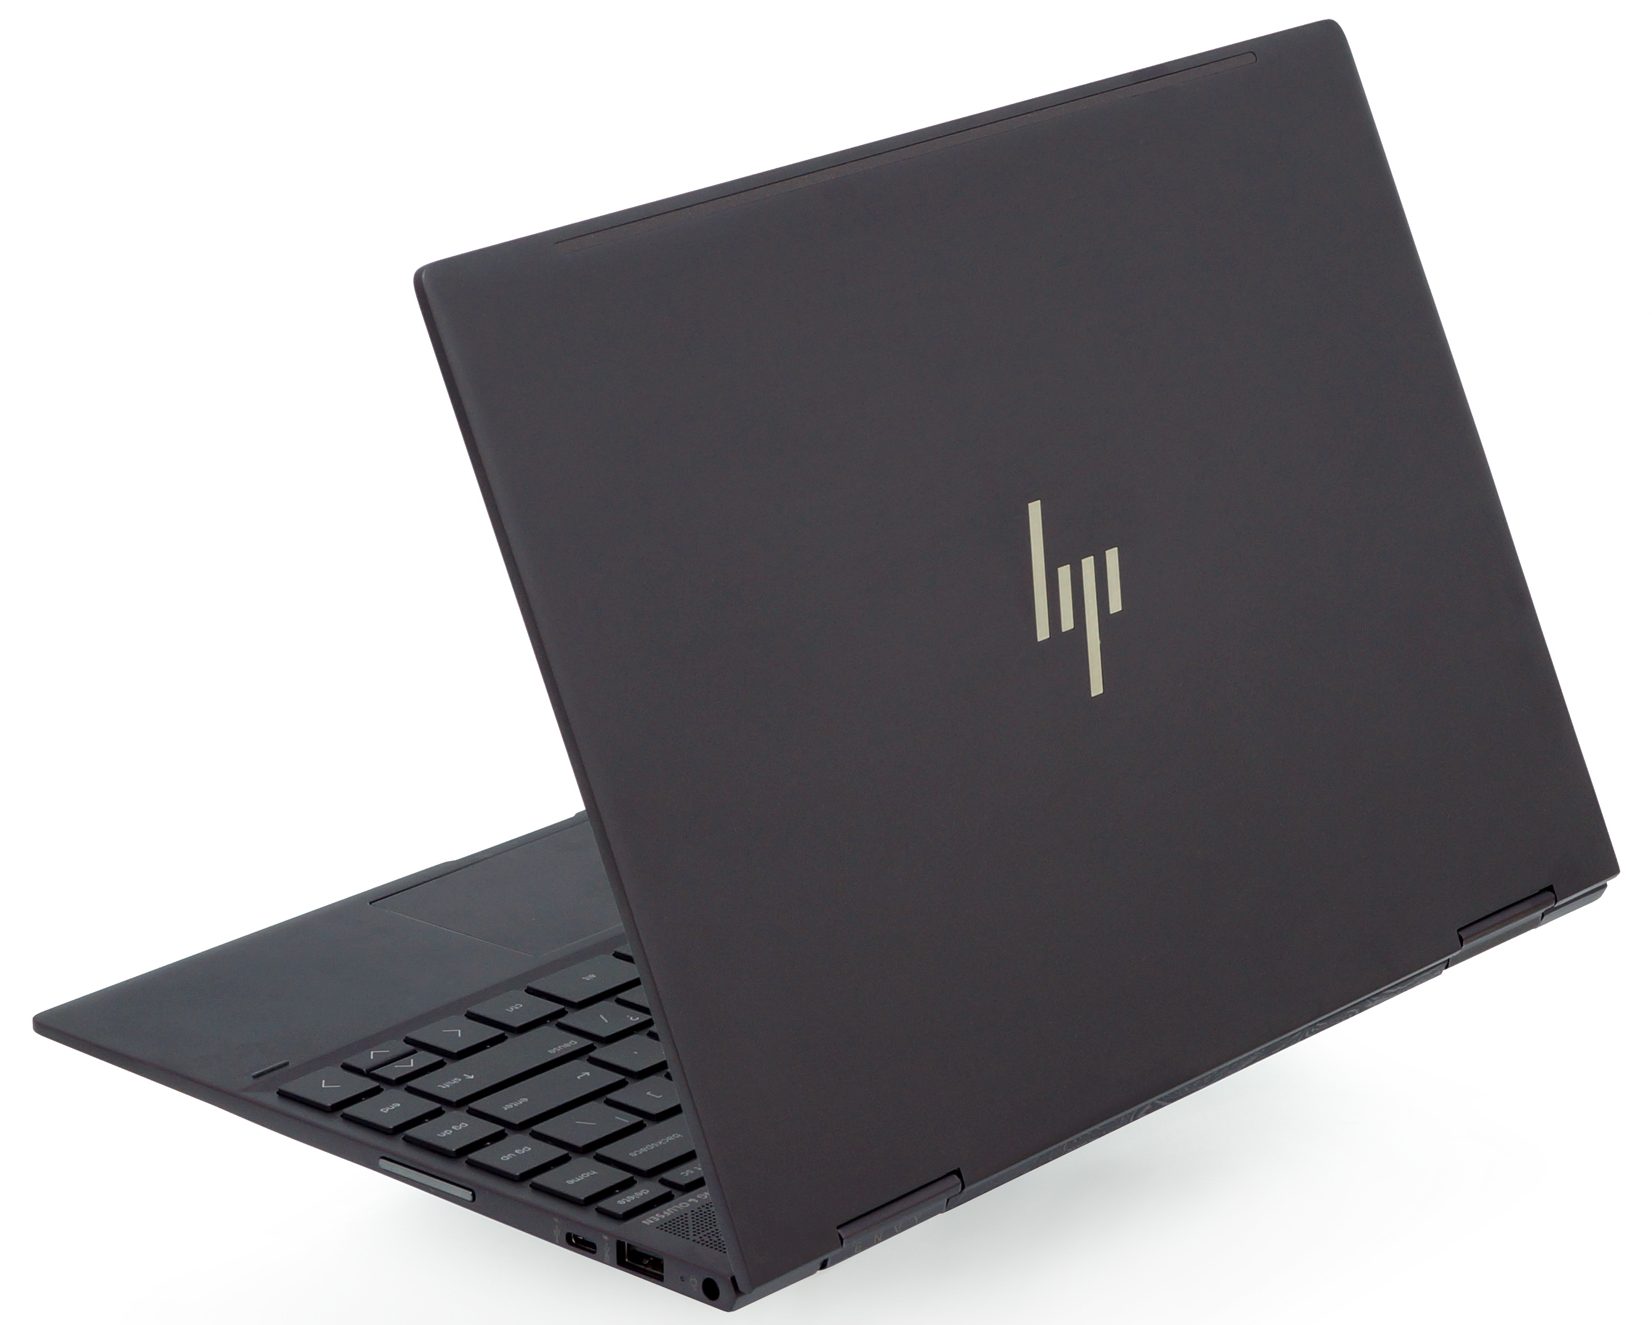 HP ENVY x360 13 (13-ag0000) - Specs, Tests, and Prices